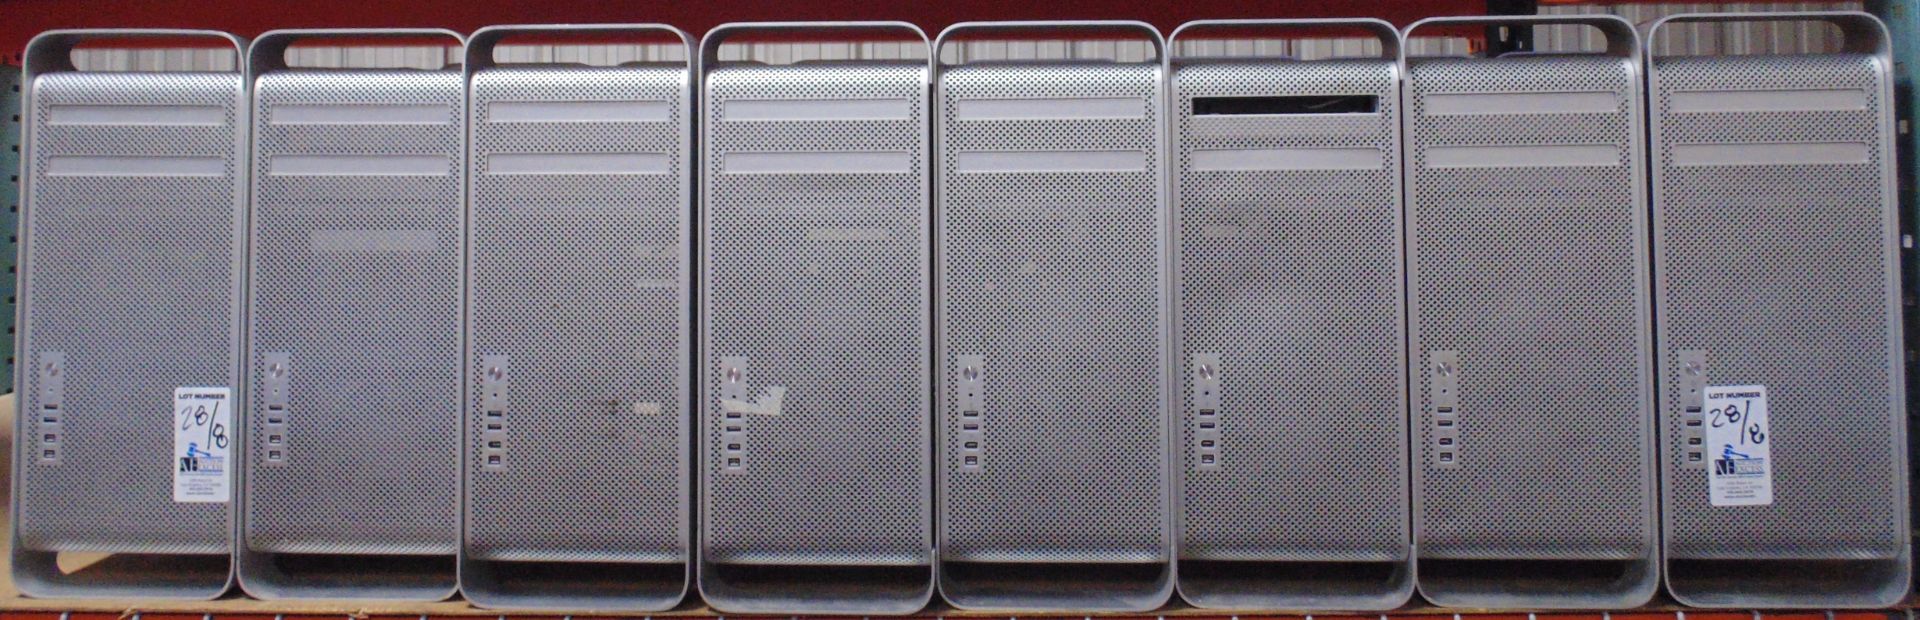 LOT OF 8 MAC PRO TOWERS